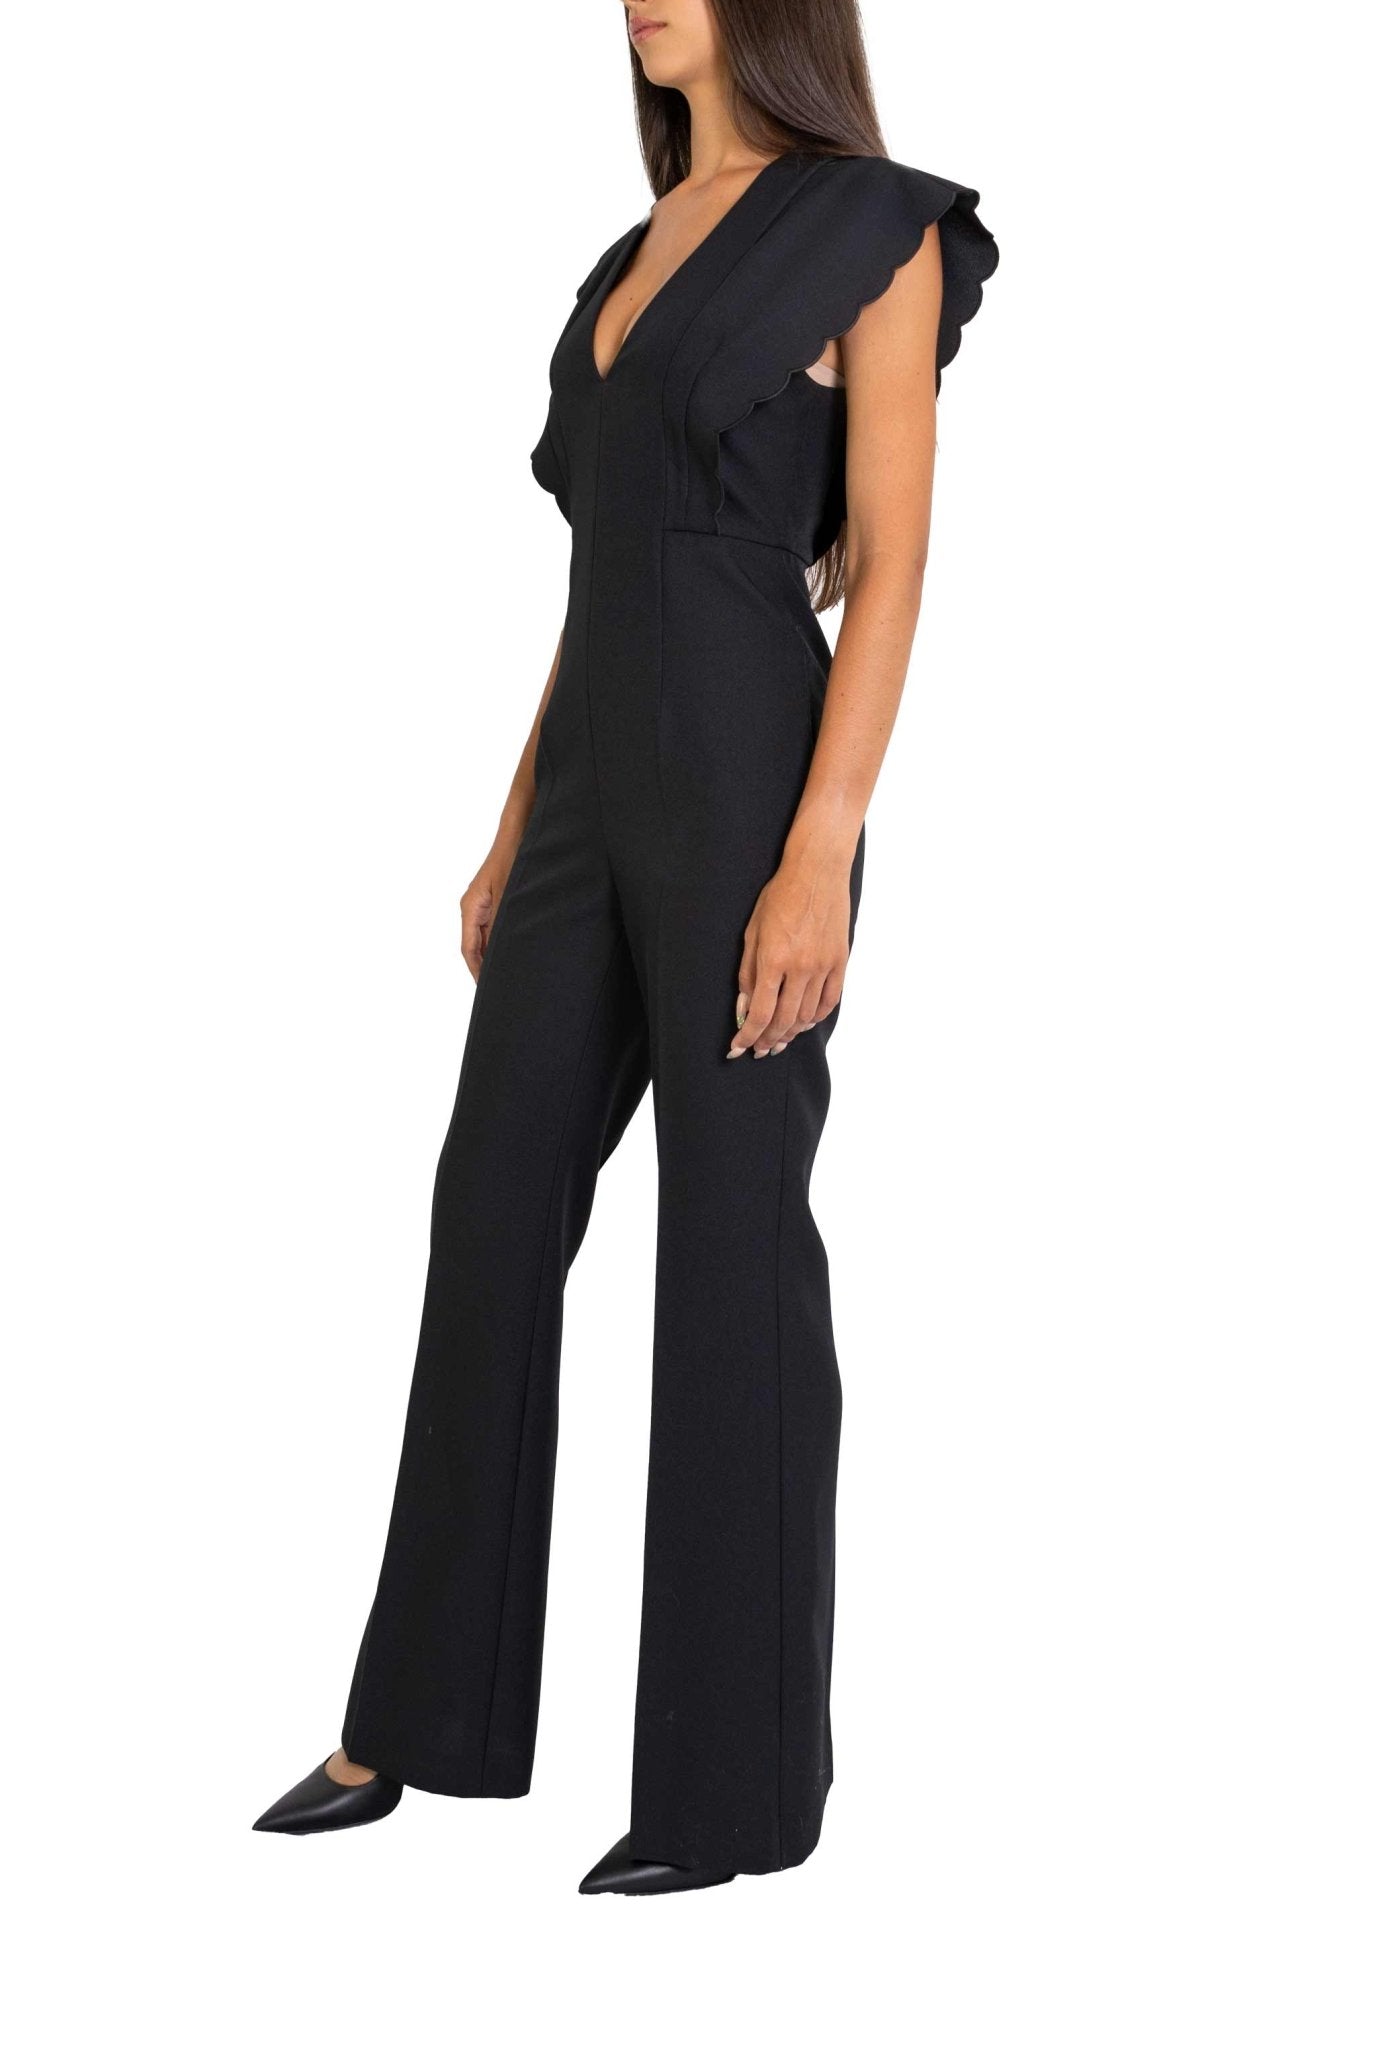 Dropship V Neck Romper One Piece Jumpsuit S-XL to Sell Online at a Lower  Price | Doba